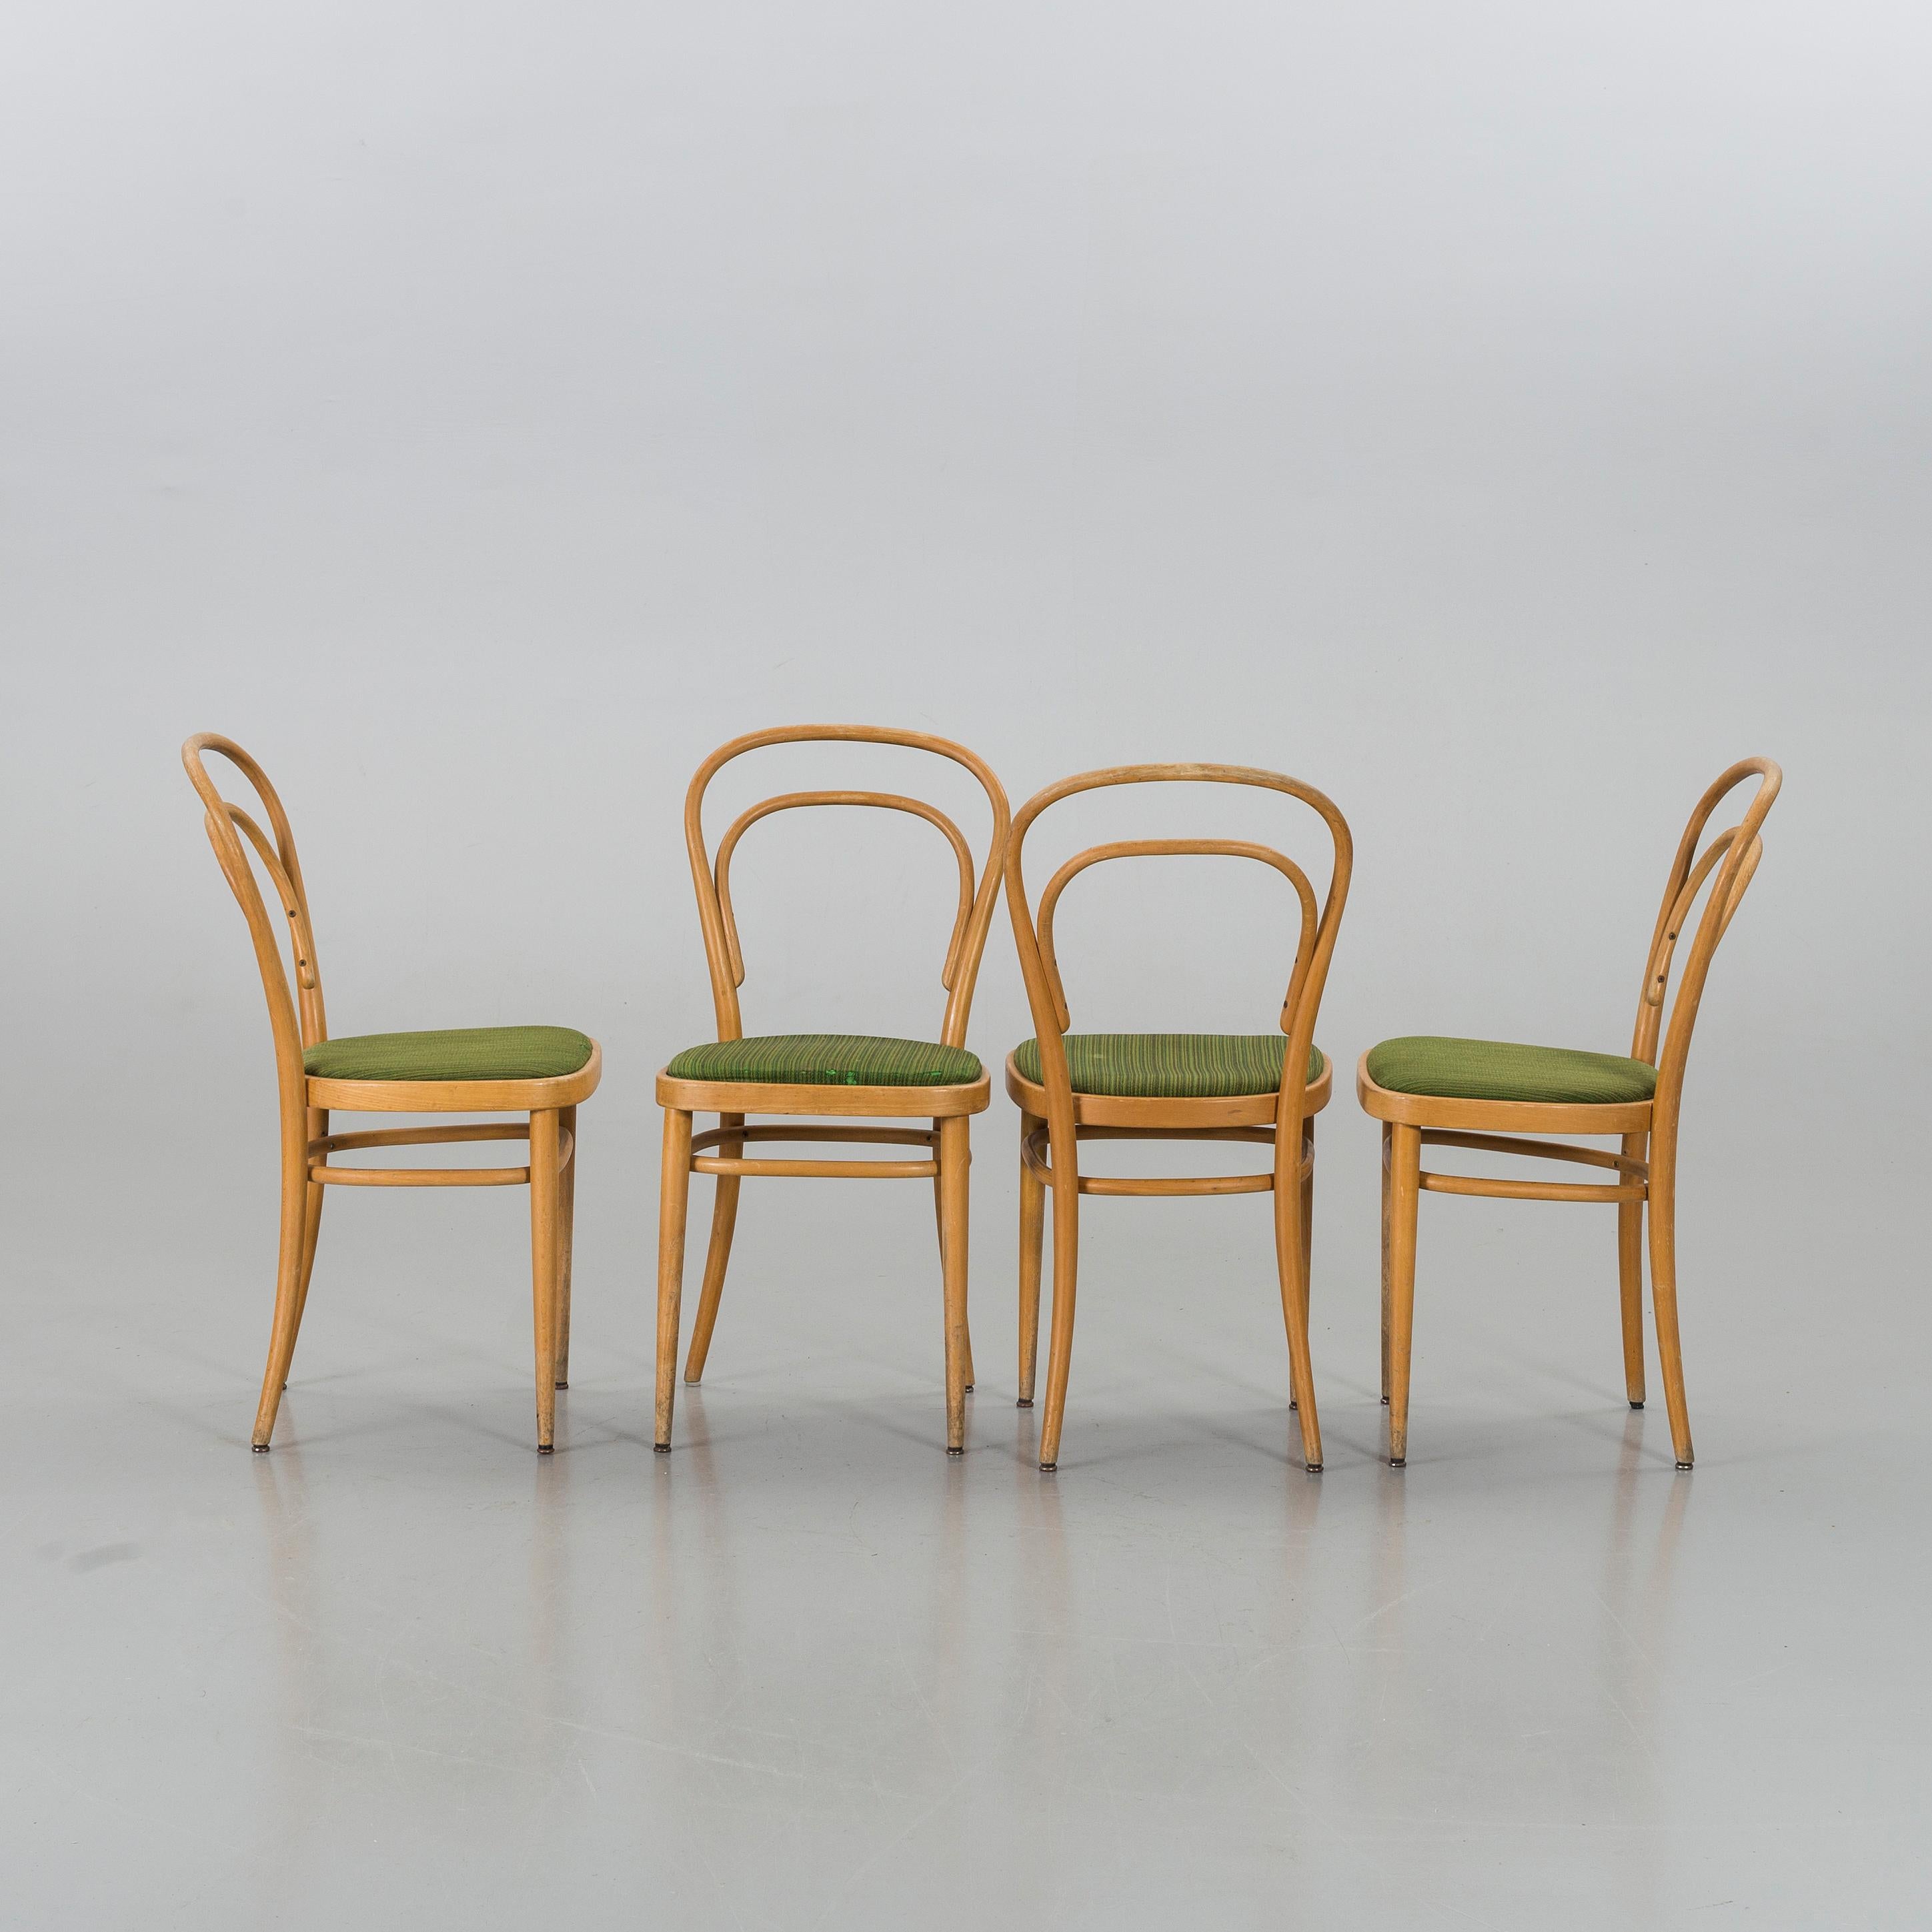 Thonet Beech Bentwood Chairs, Made in Mid-20th Century, Set of 8 1